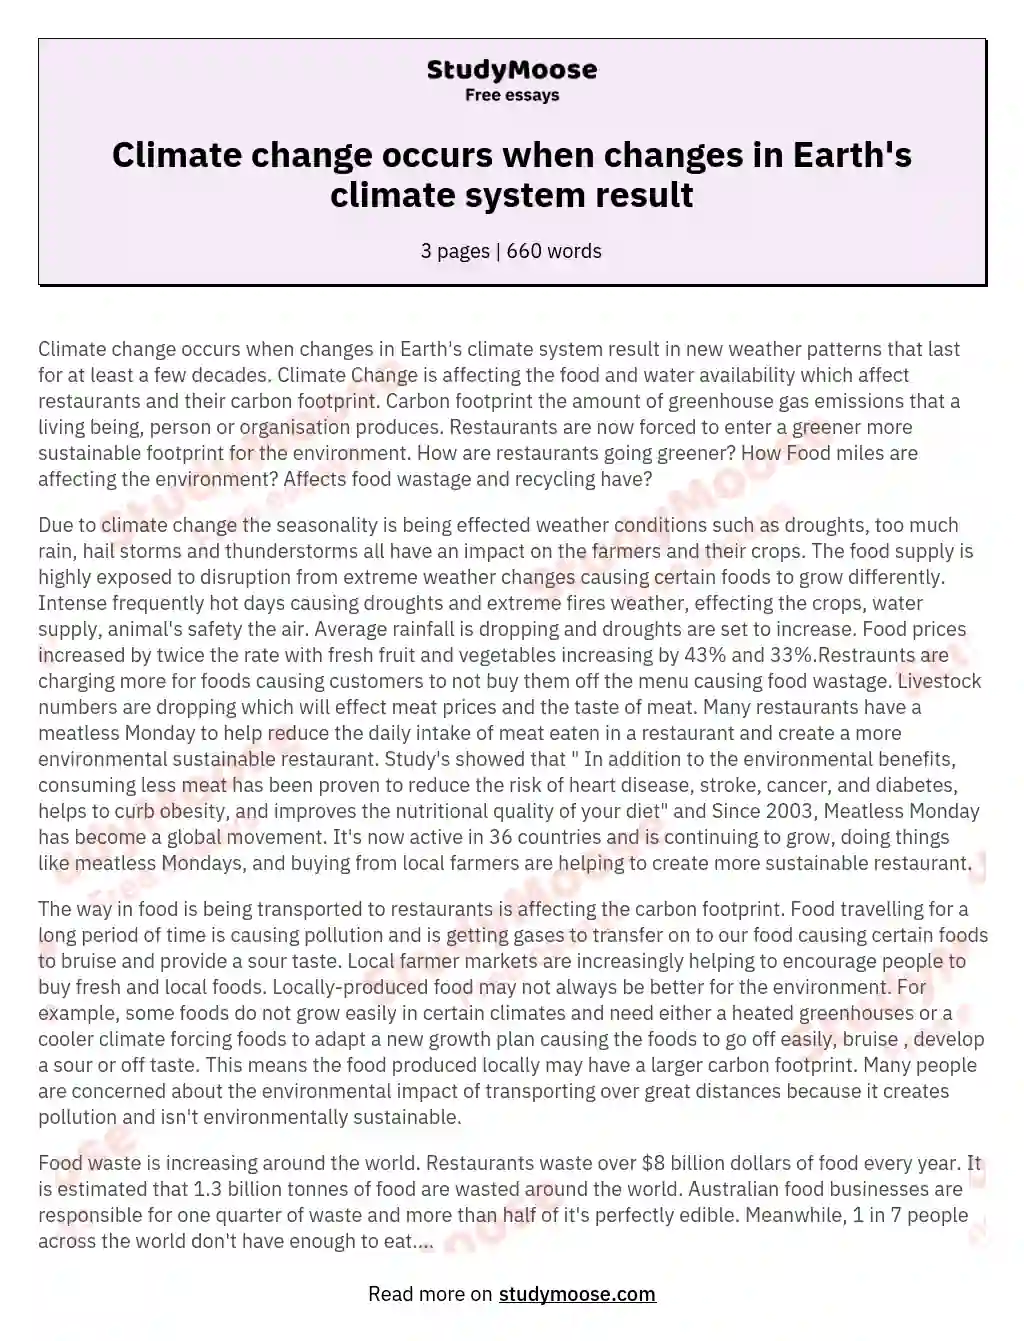 Climate change occurs when changes in Earth's climate system result